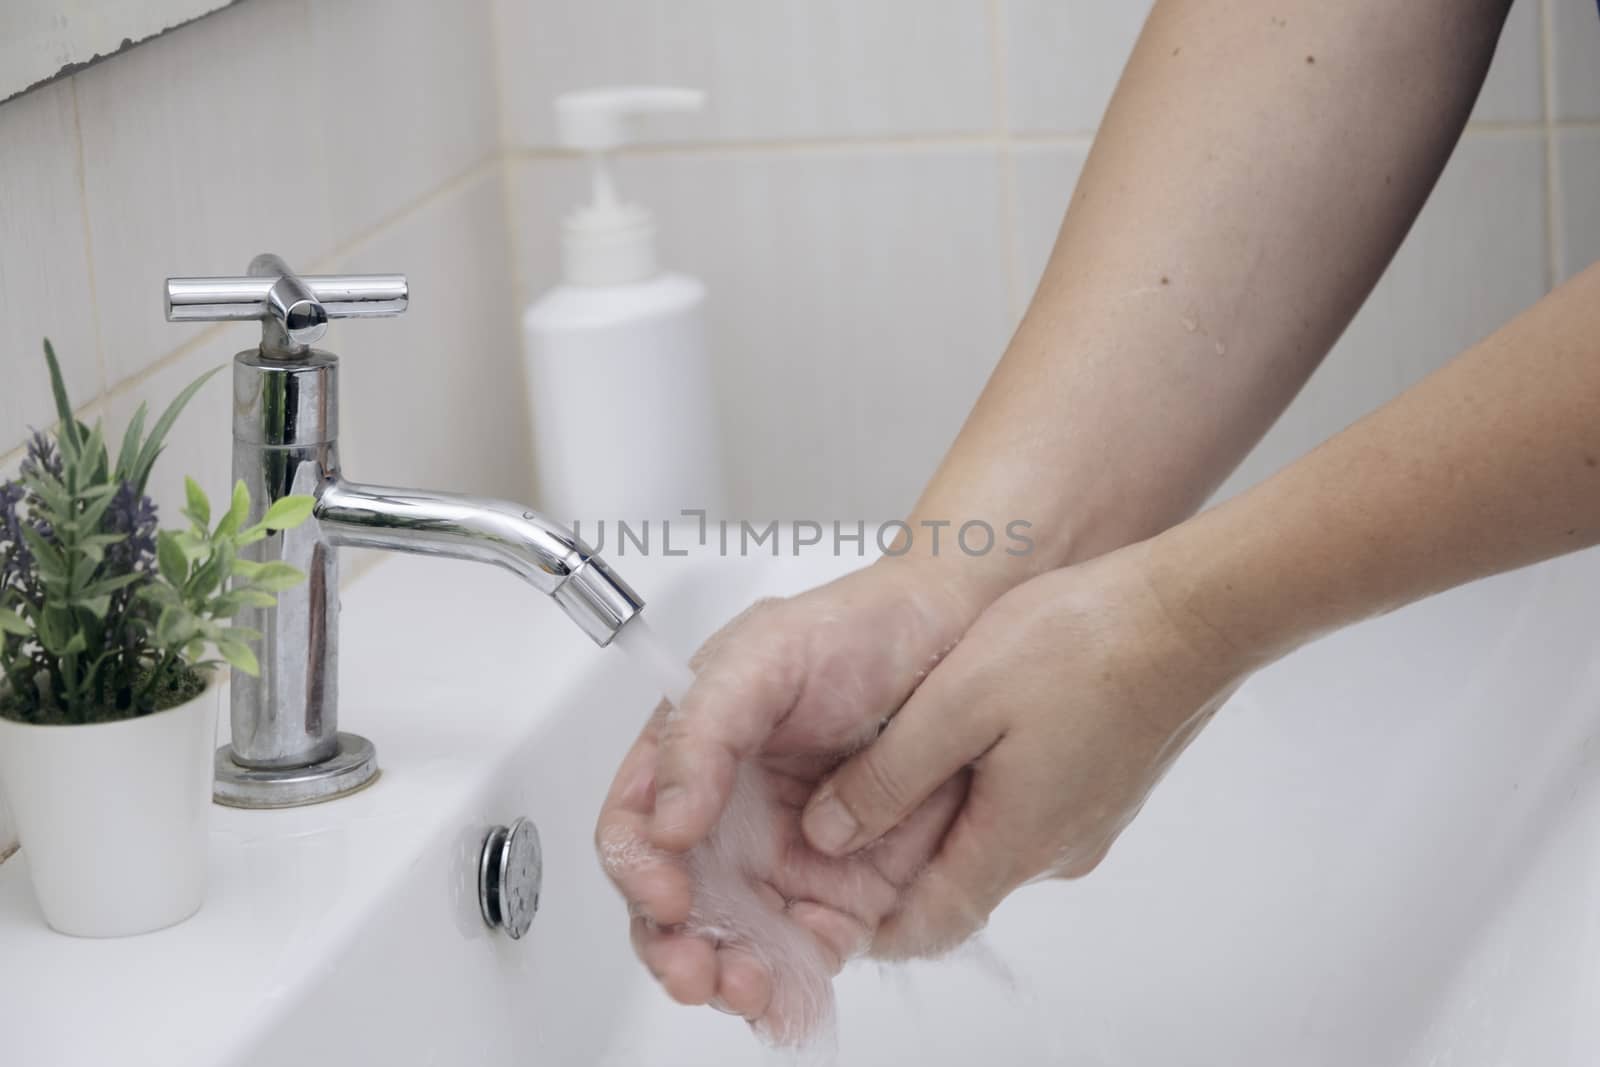 Personal hygiene, cleansing the hands. Washing hands rubbing with soap man for corona virus prevention, hygiene to stop spreading coronavirus.